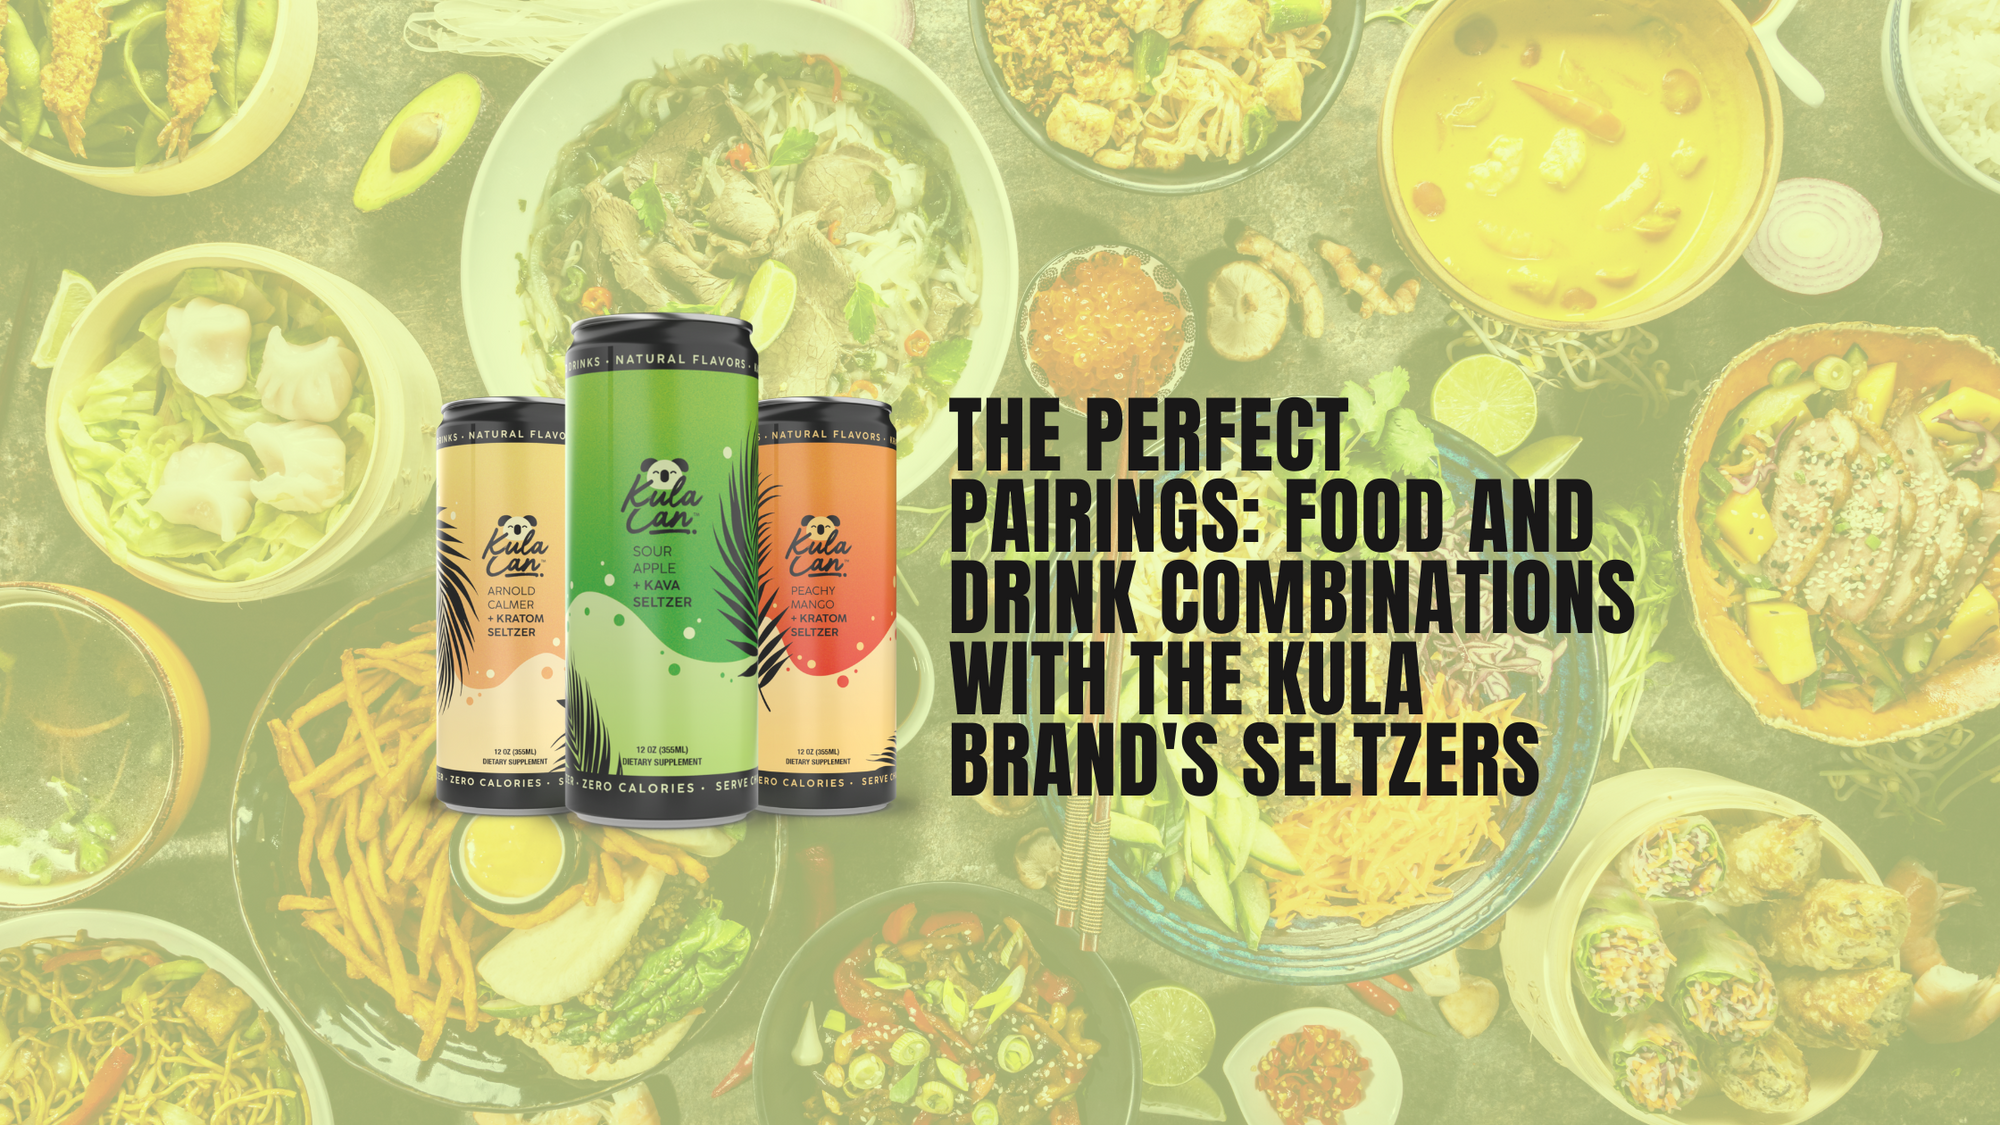 The Perfect Pairings: Food and Drink Combinations with The Kula Brand's Seltzers